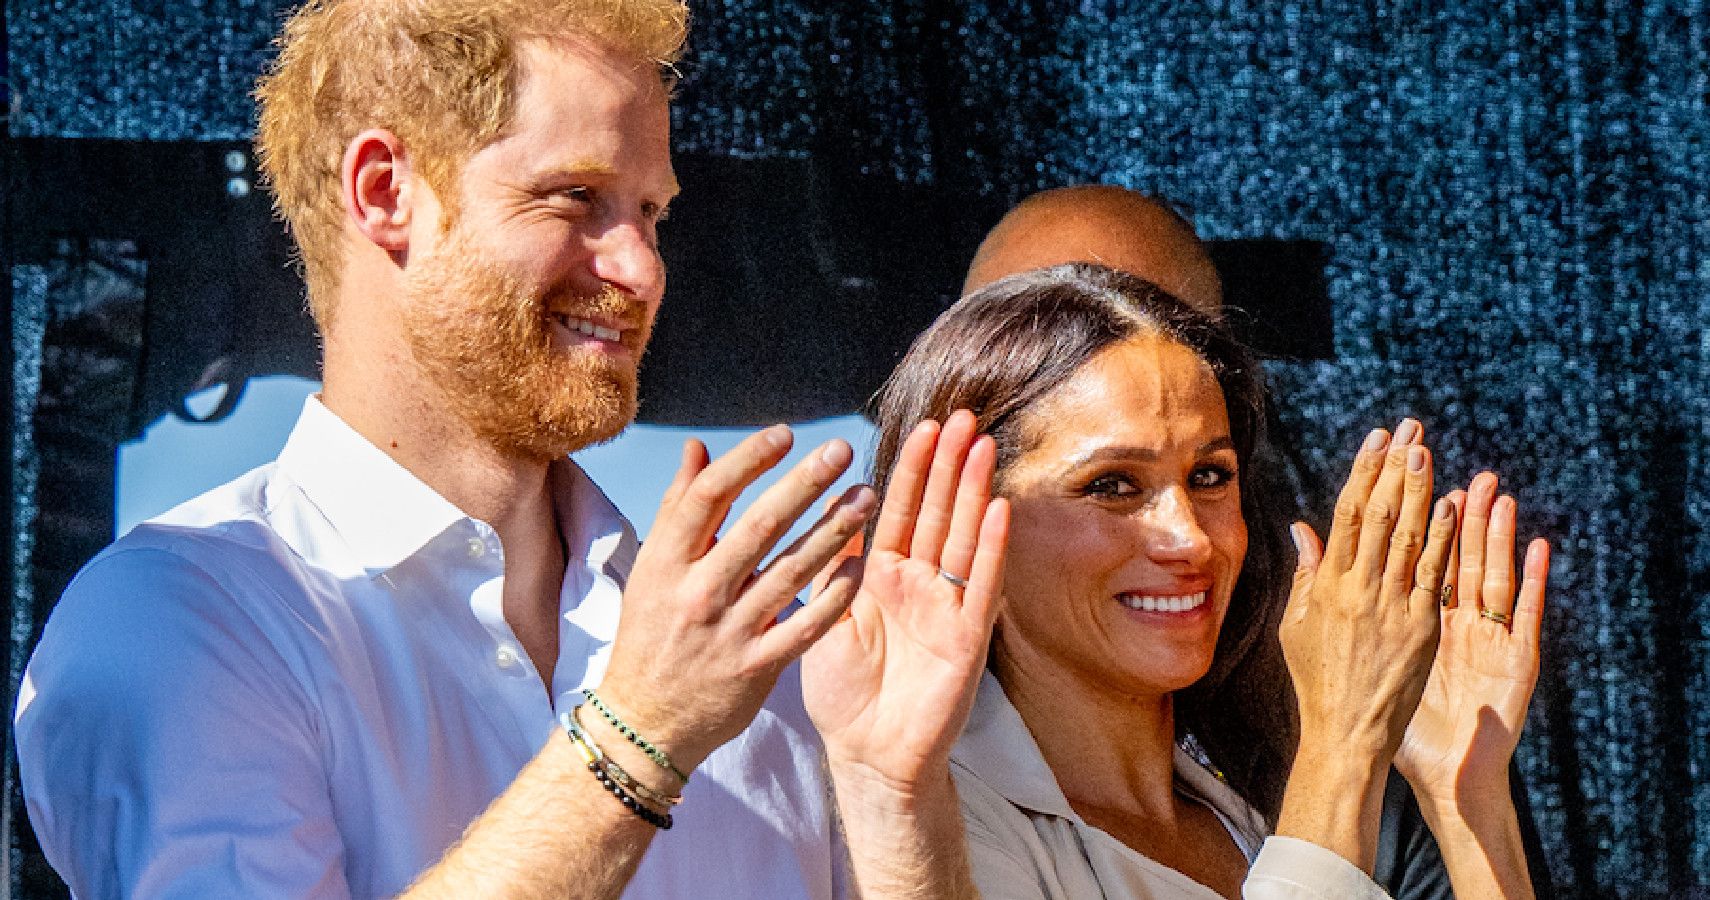 Meghan Markle Spent $200,000 On Her Wardrobe For Invictus Games